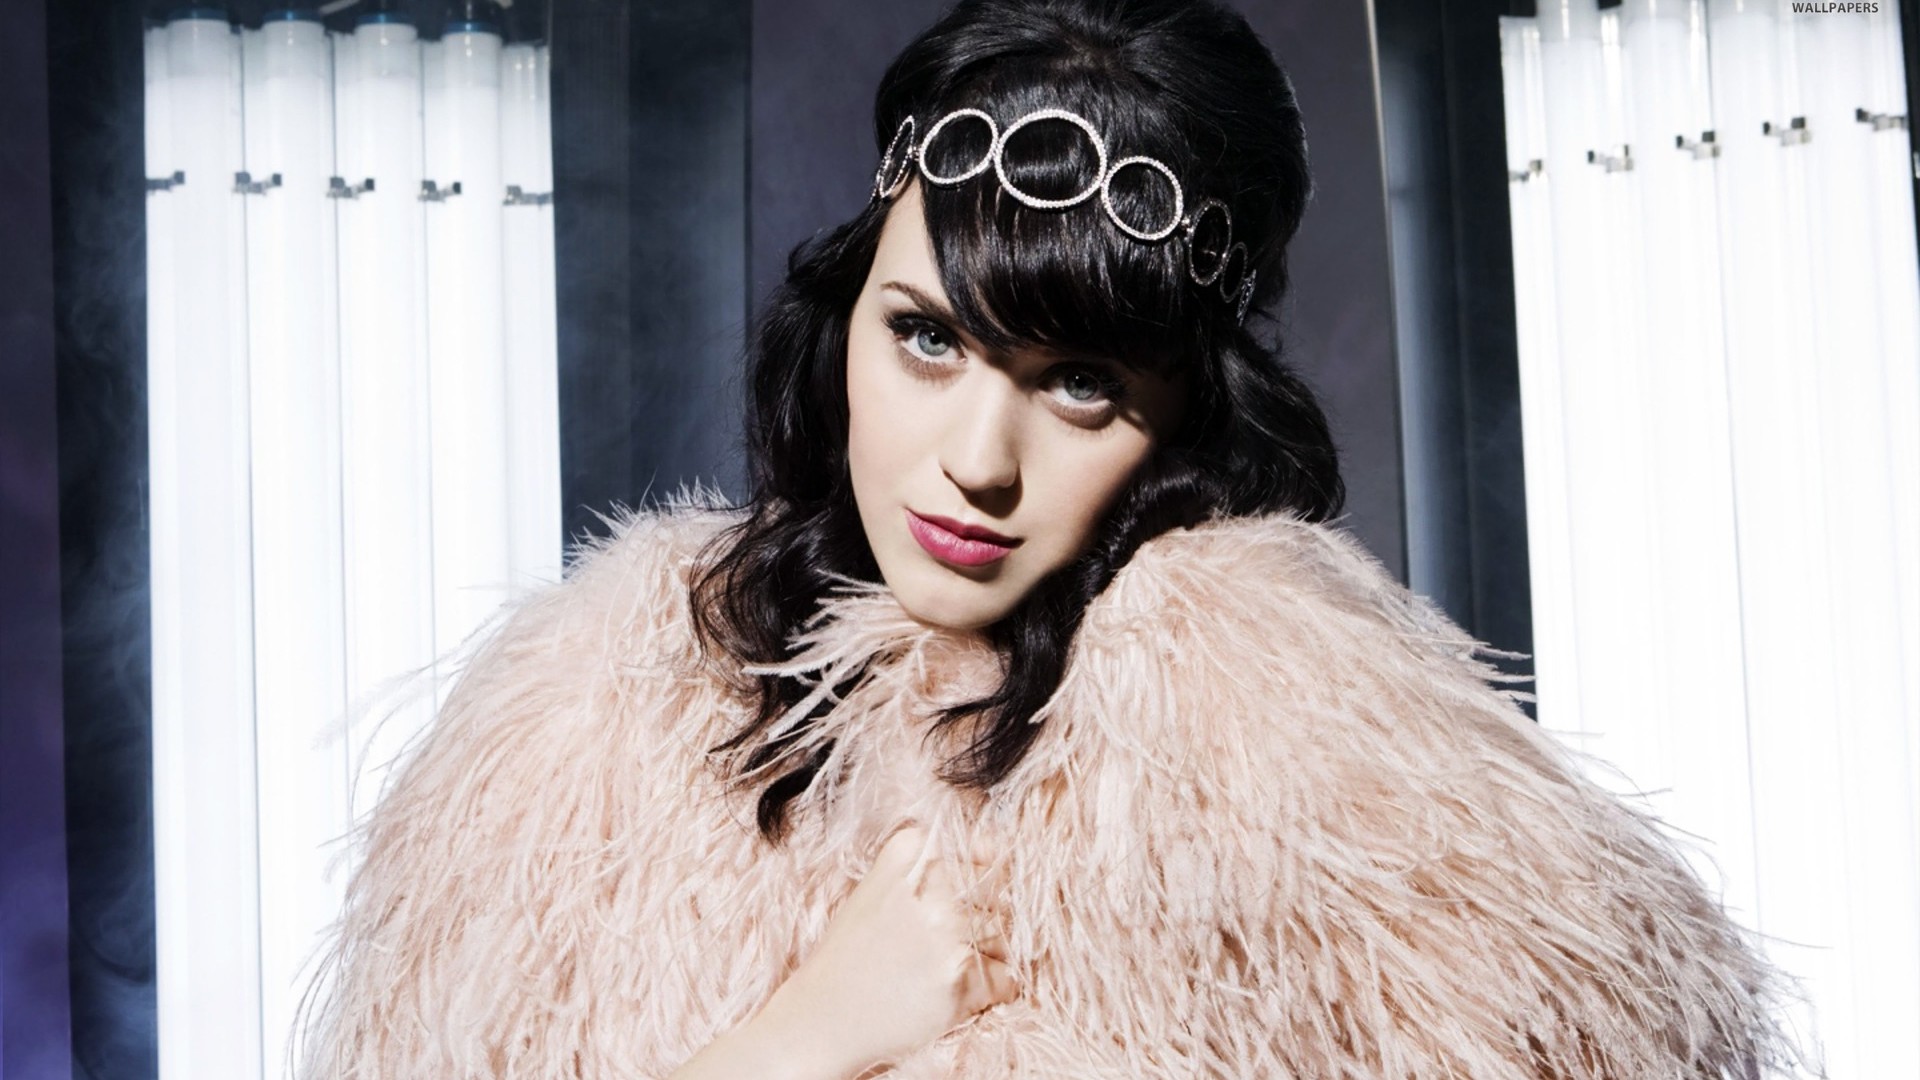 Katy Perry Full HD Wallpaper High Definition